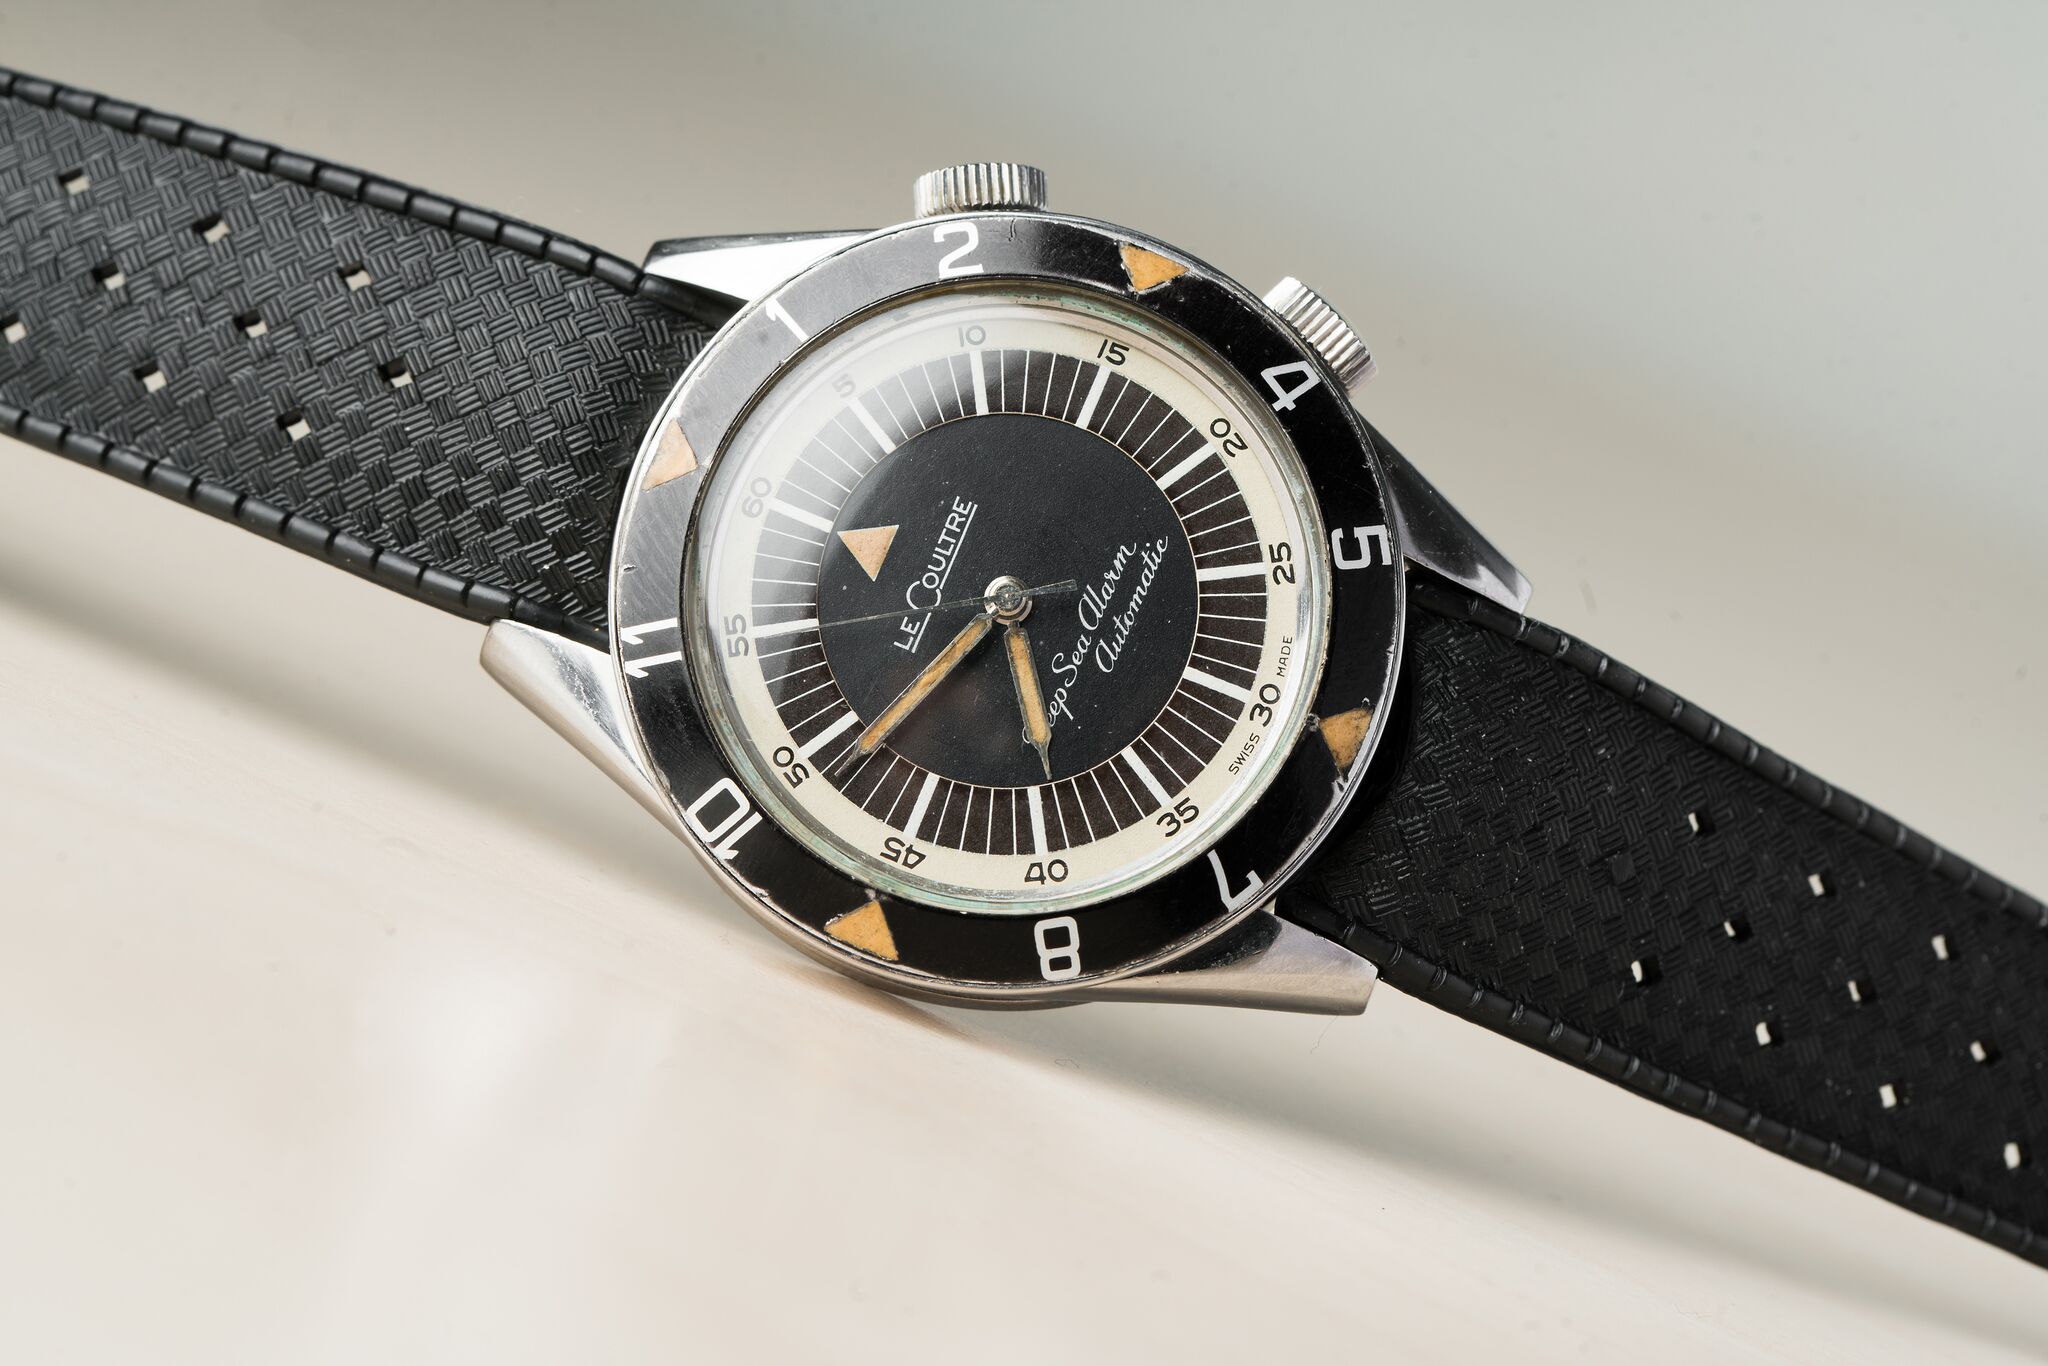 Hands-on With A Vintage Jaeger LeCoultre Deep Sea Alarm